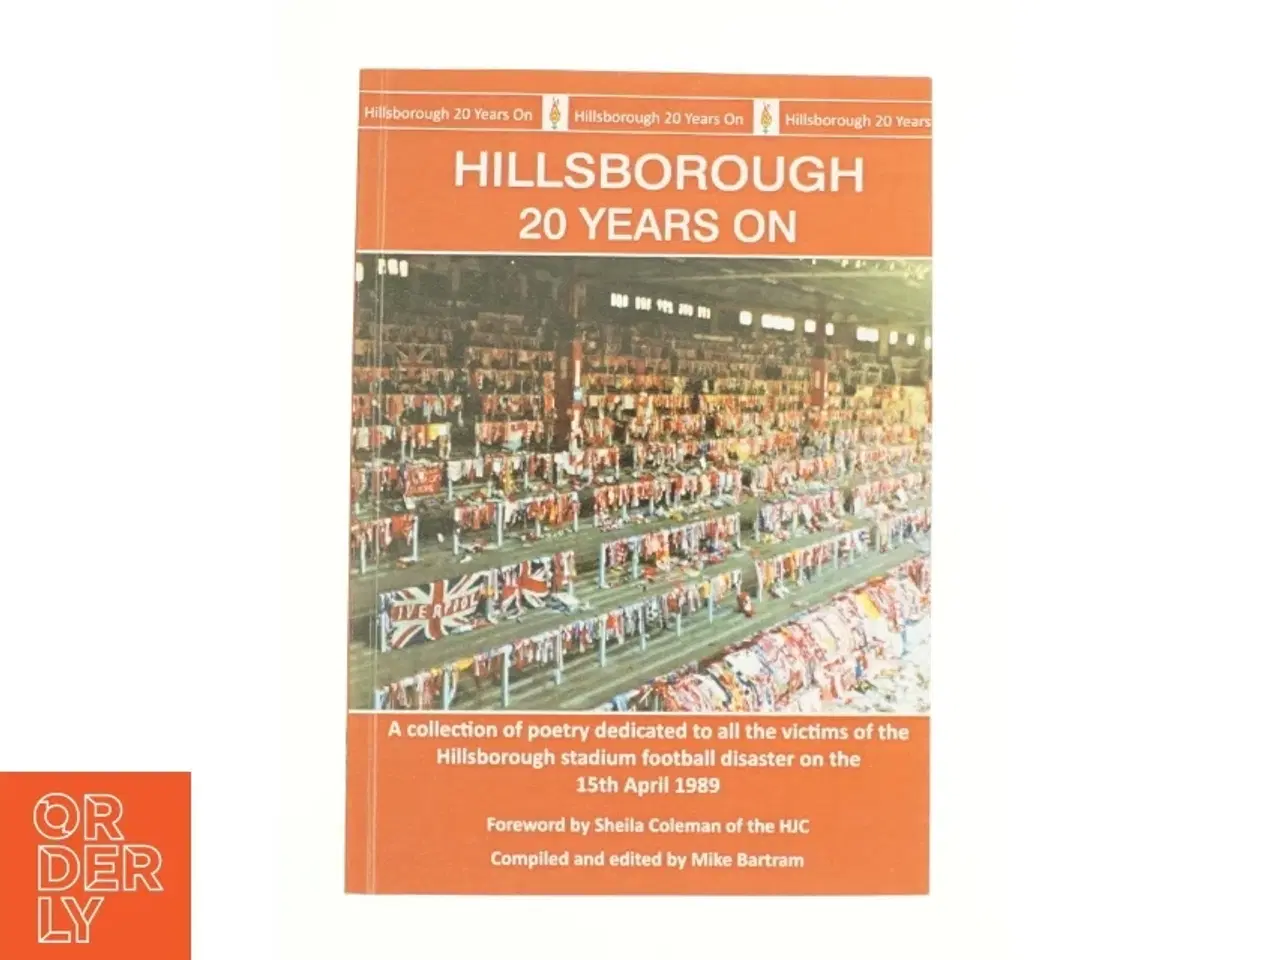 Billede 1 - Hillsborough 20 Years on: a Collection of Poetry Dedicated to All the Victims of the Hillsborough Stadium Football Disaster on the 15th April 1989 (Bo